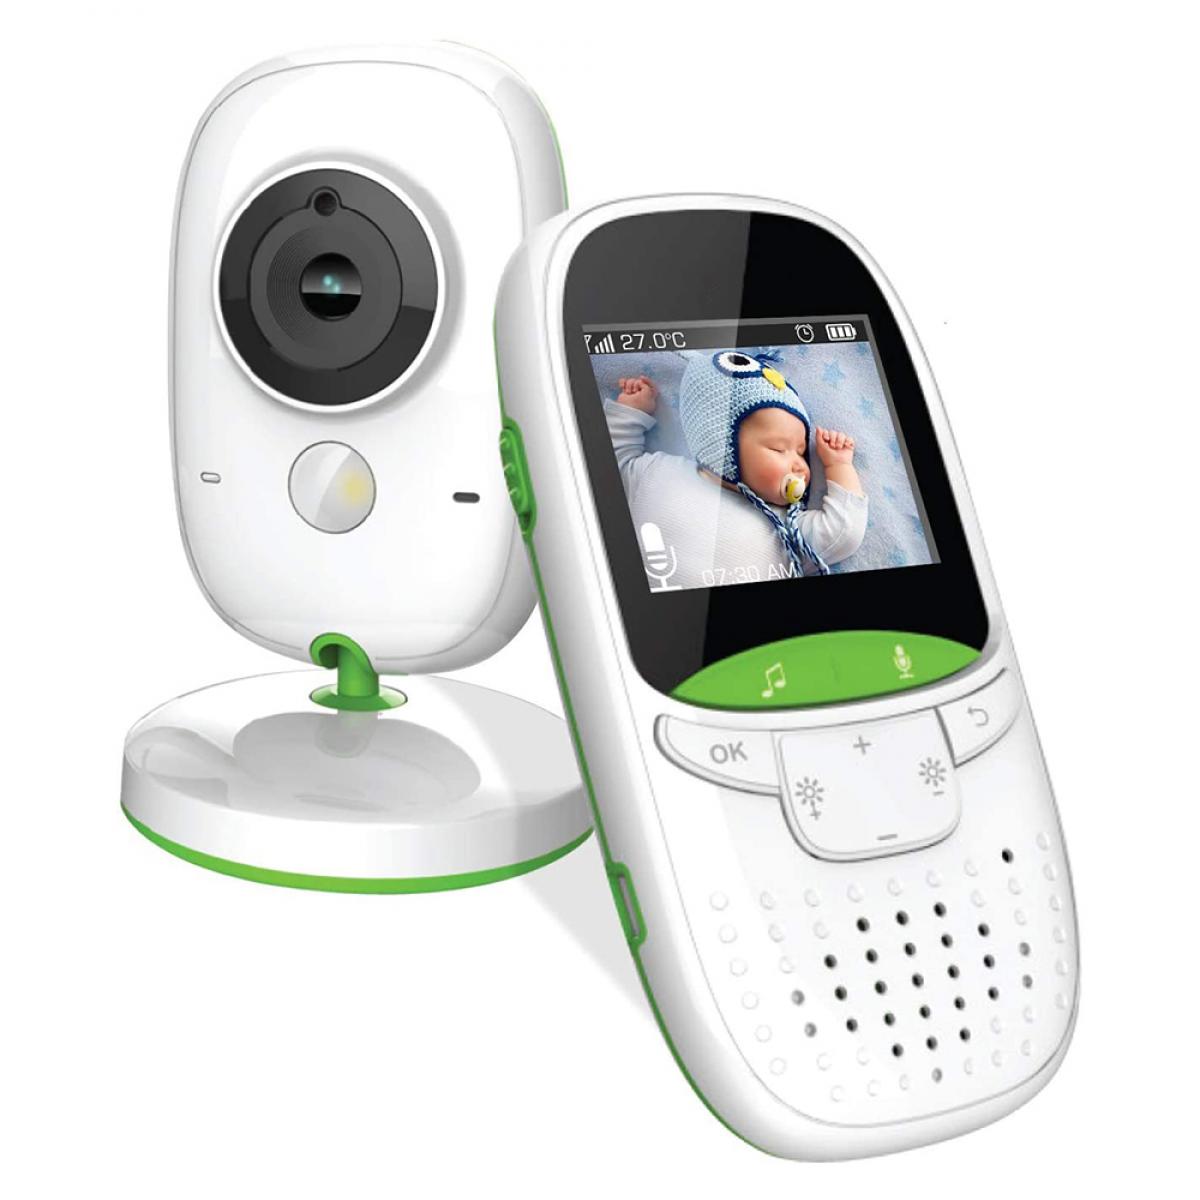 Wireless Video Baby Monitor W/ Night Vision Two-Way Audio Temperature Monitoring 